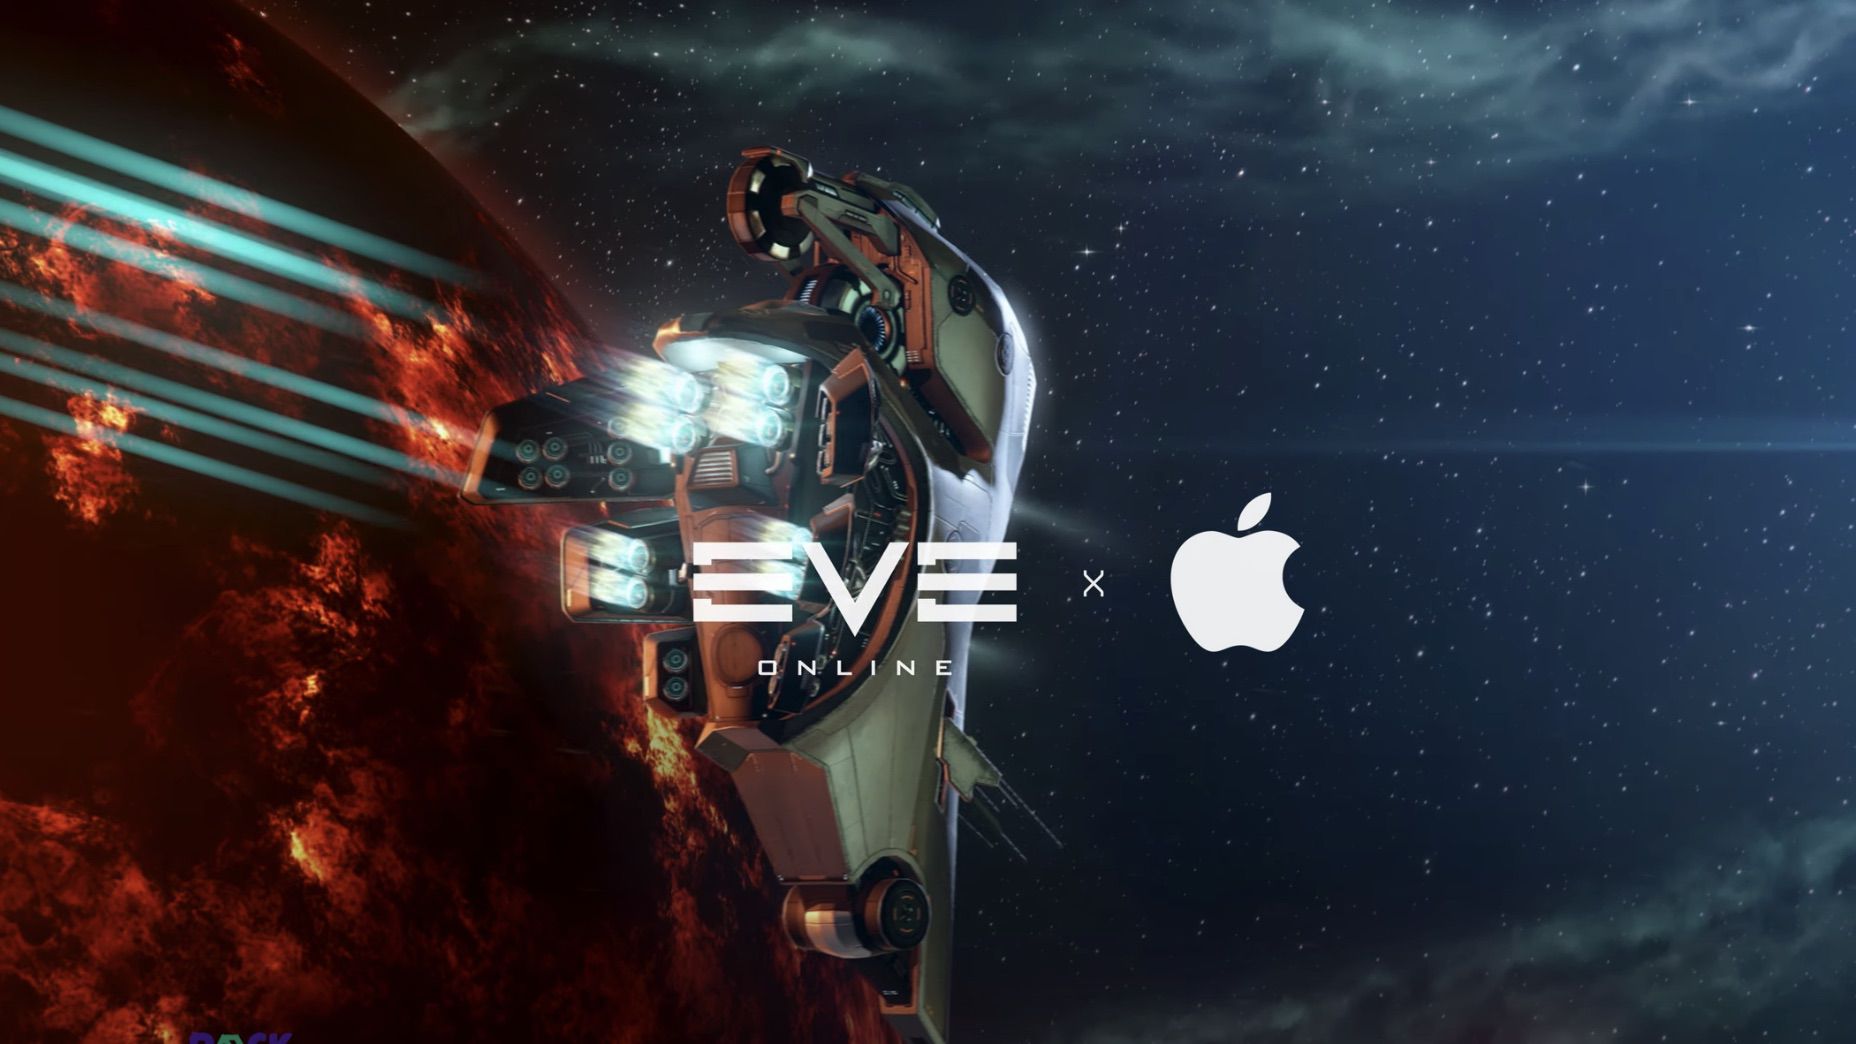 Eve Online Now Available Natively on Macs, Optimized for Apple Silicon -  MacRumors